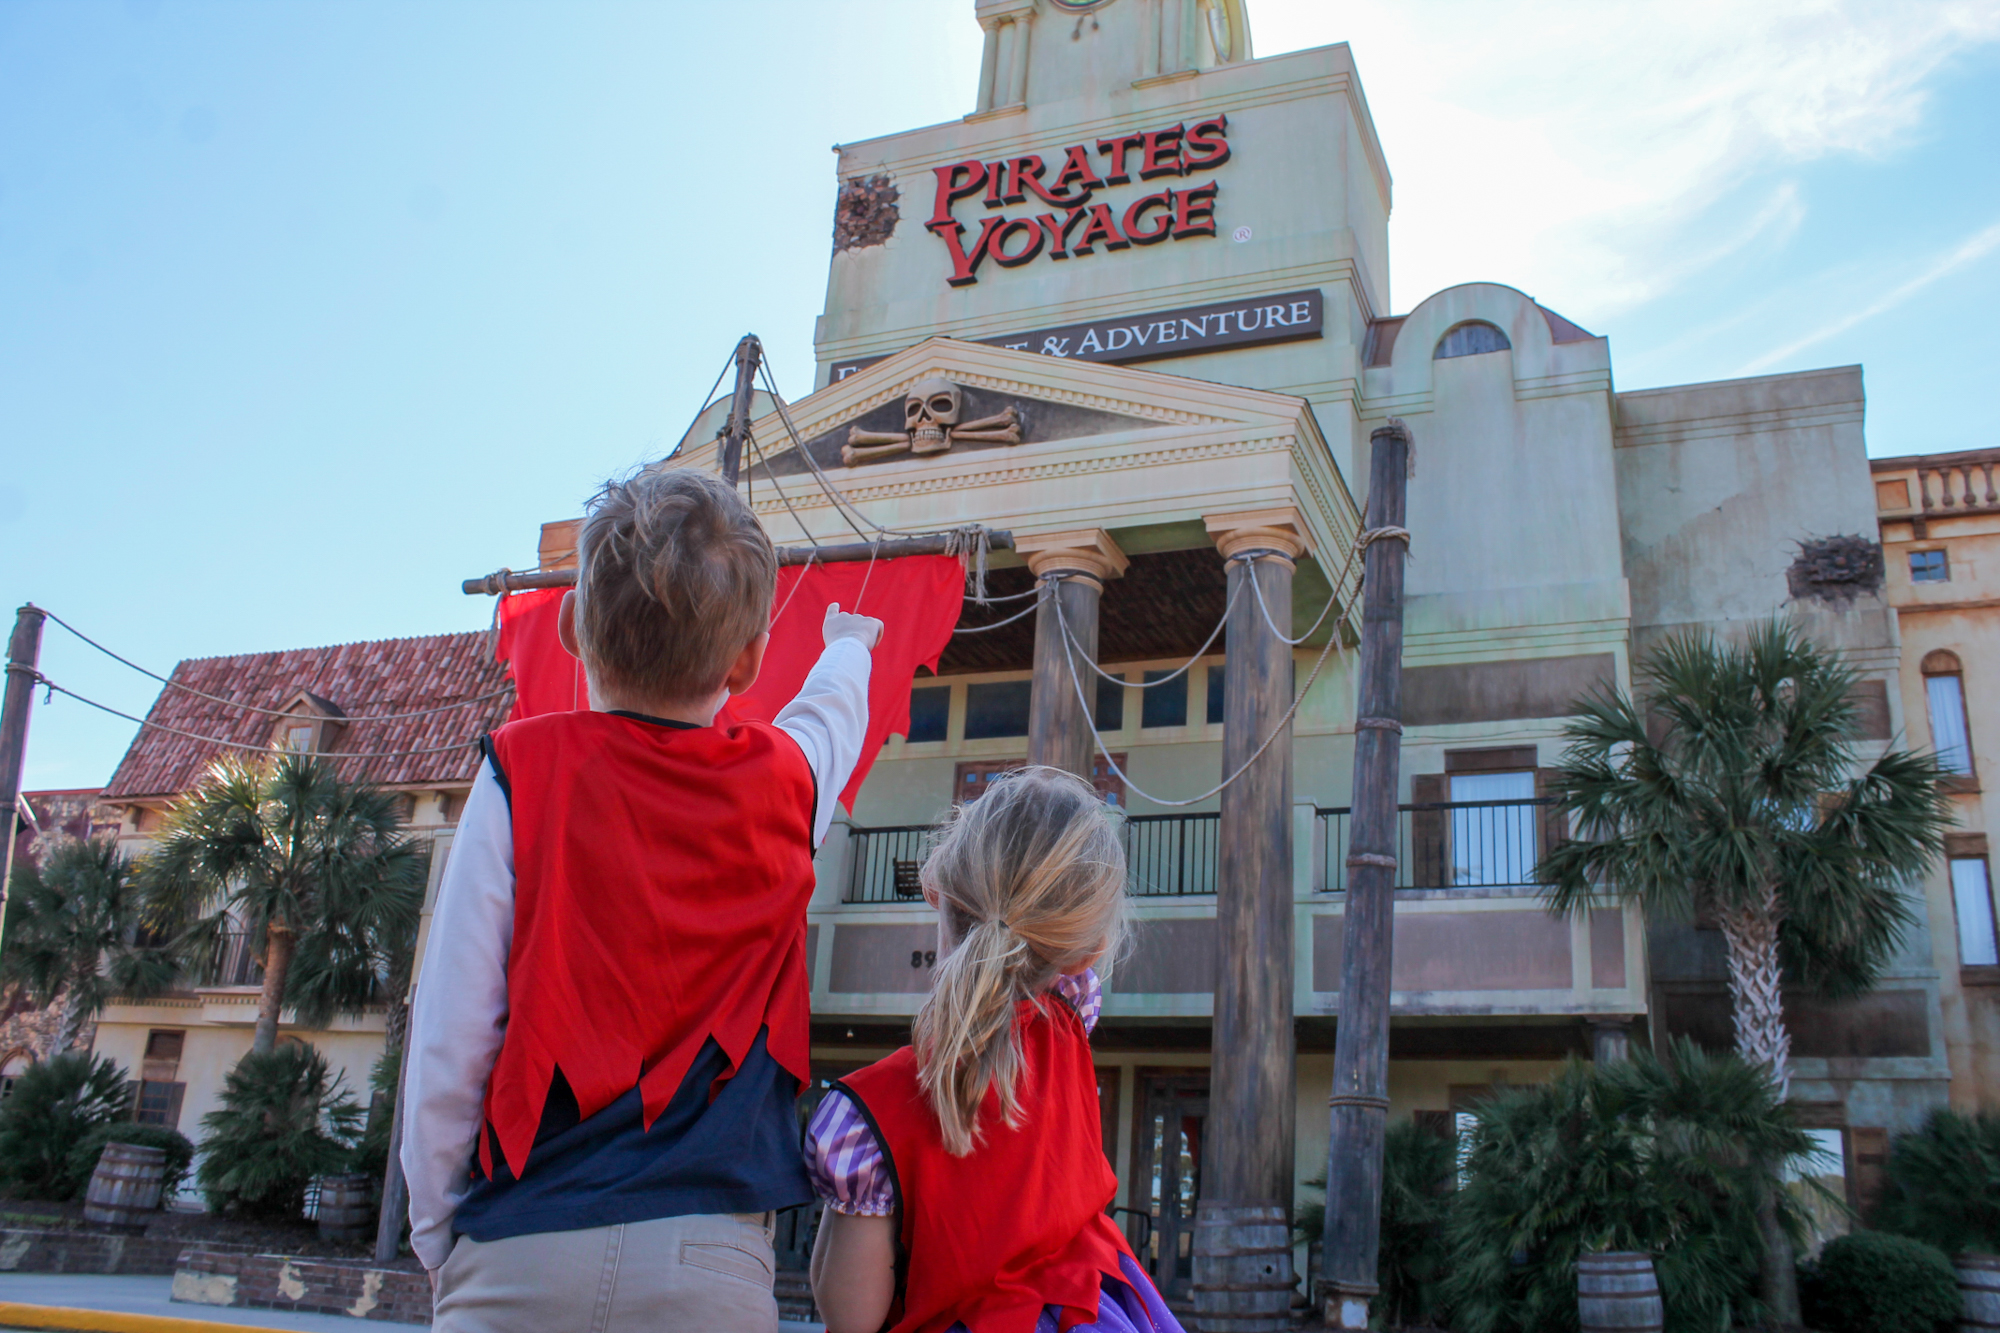 What Makes Pirates Voyage in Myrtle Beach Special?